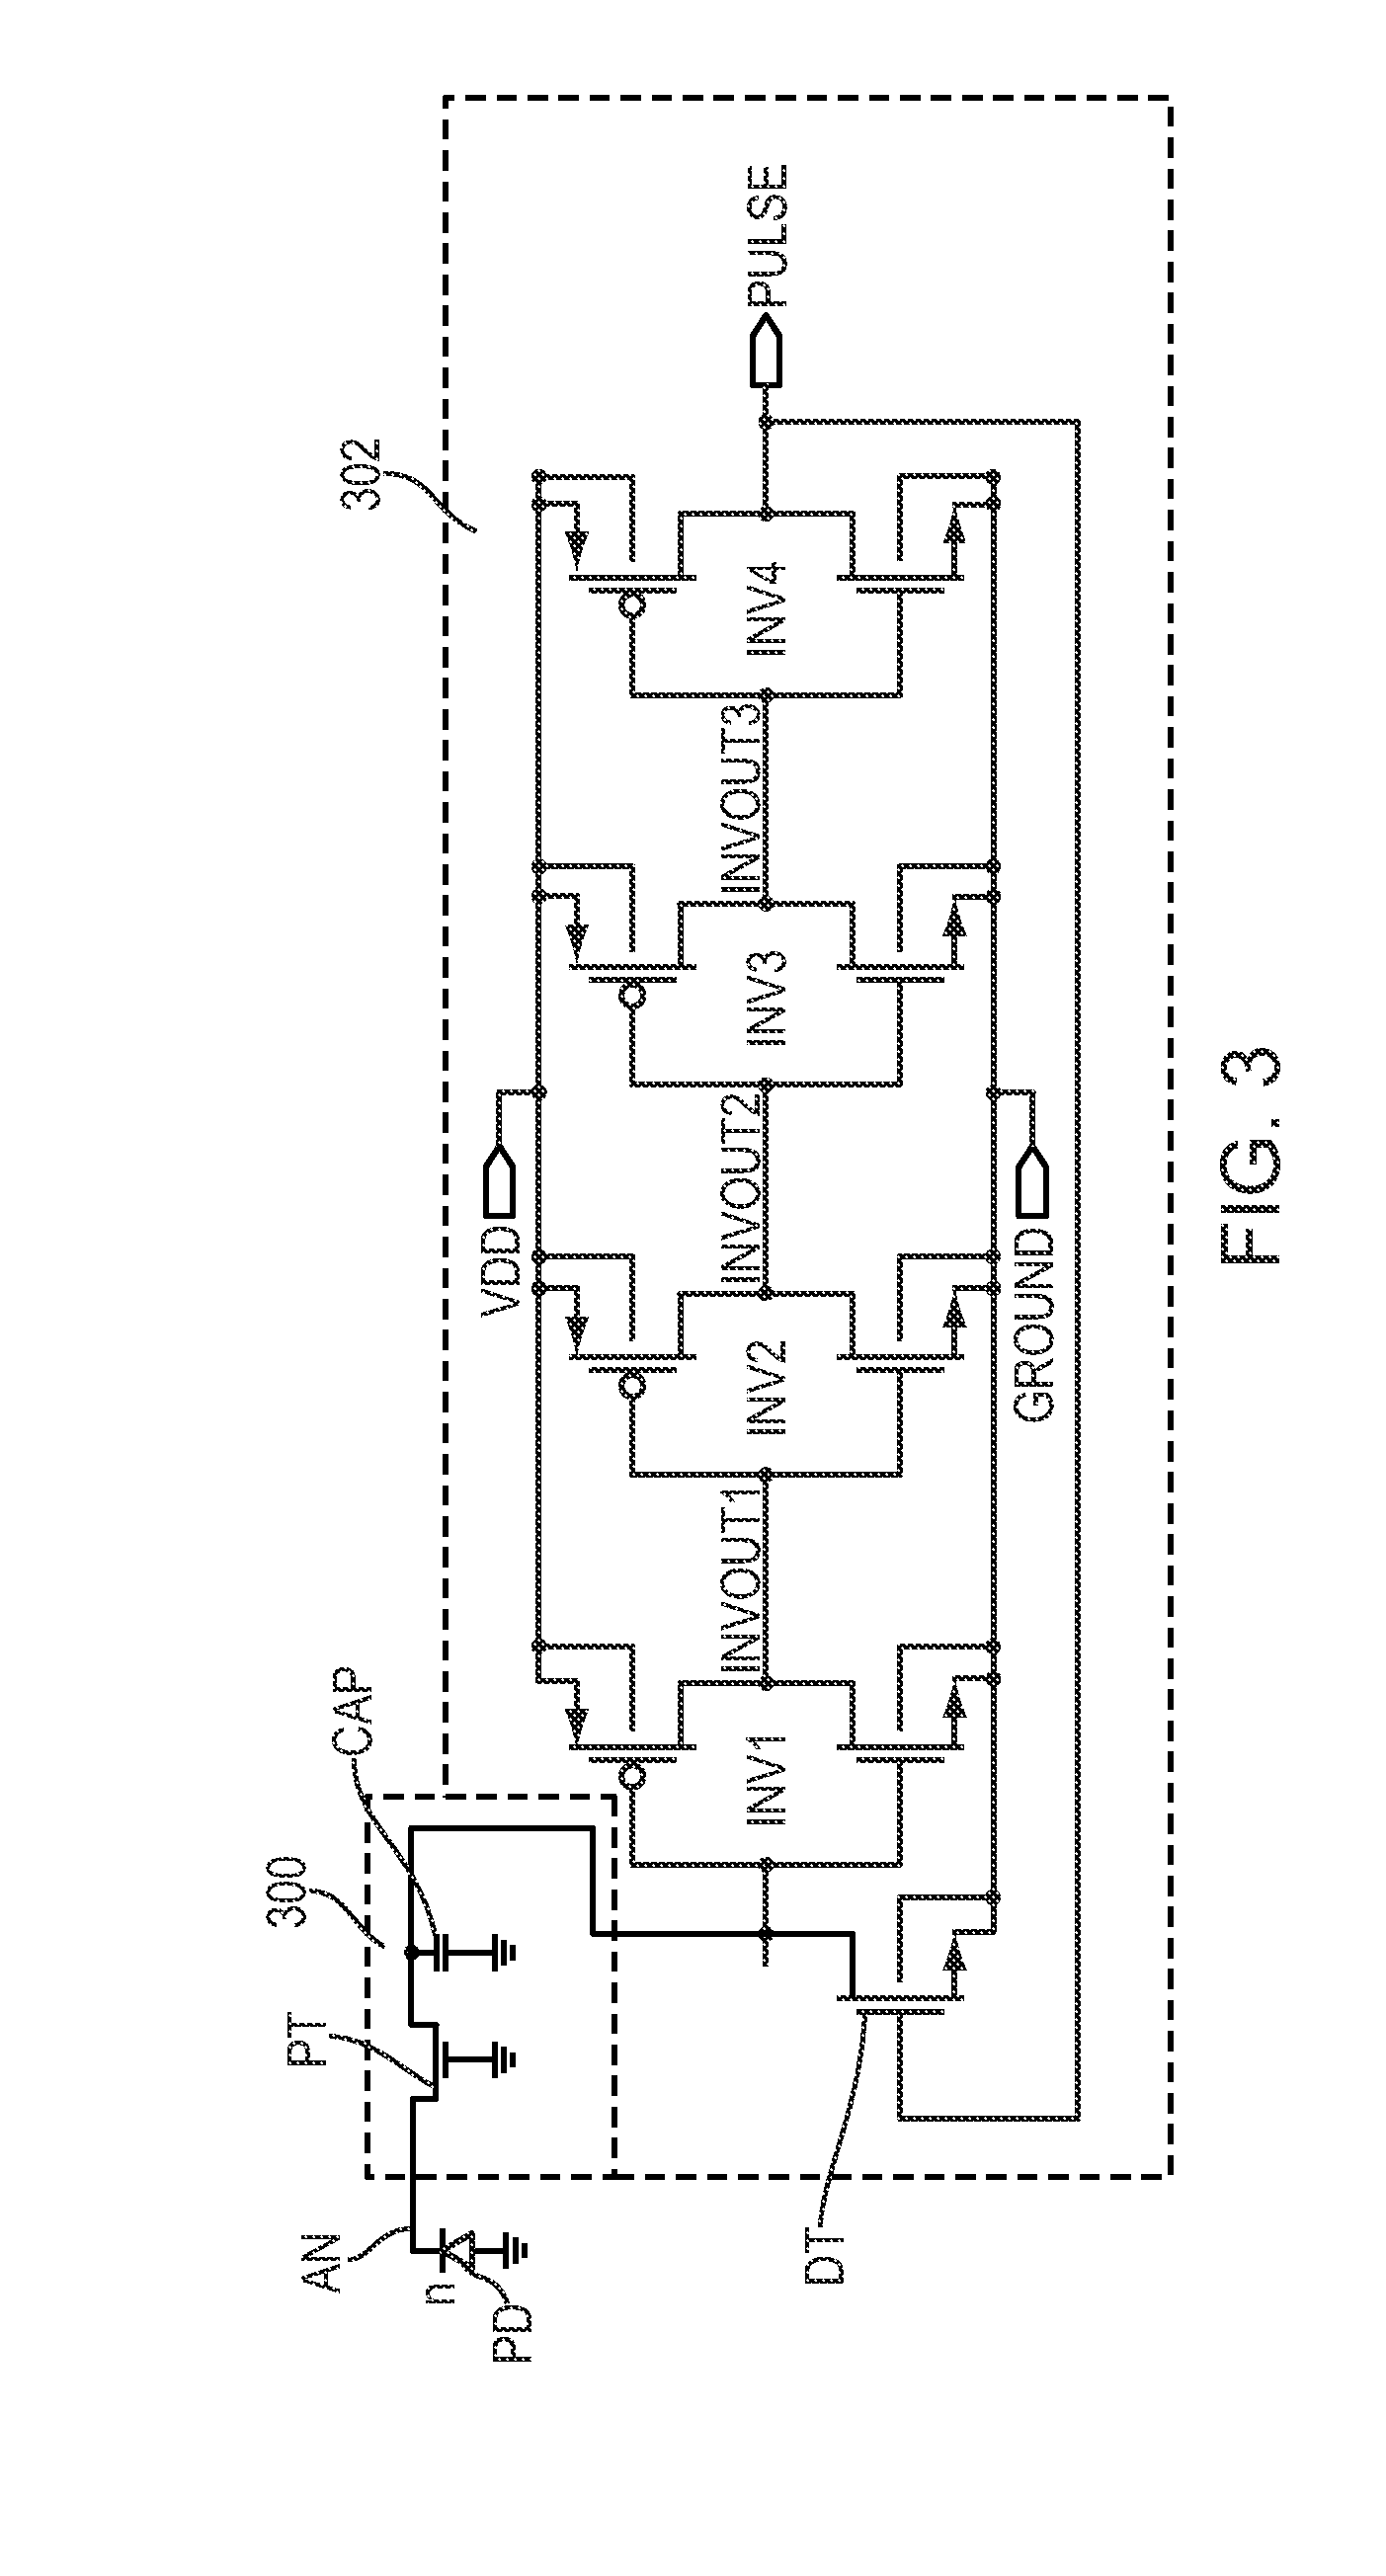 Focal plane array processing method and apparatus